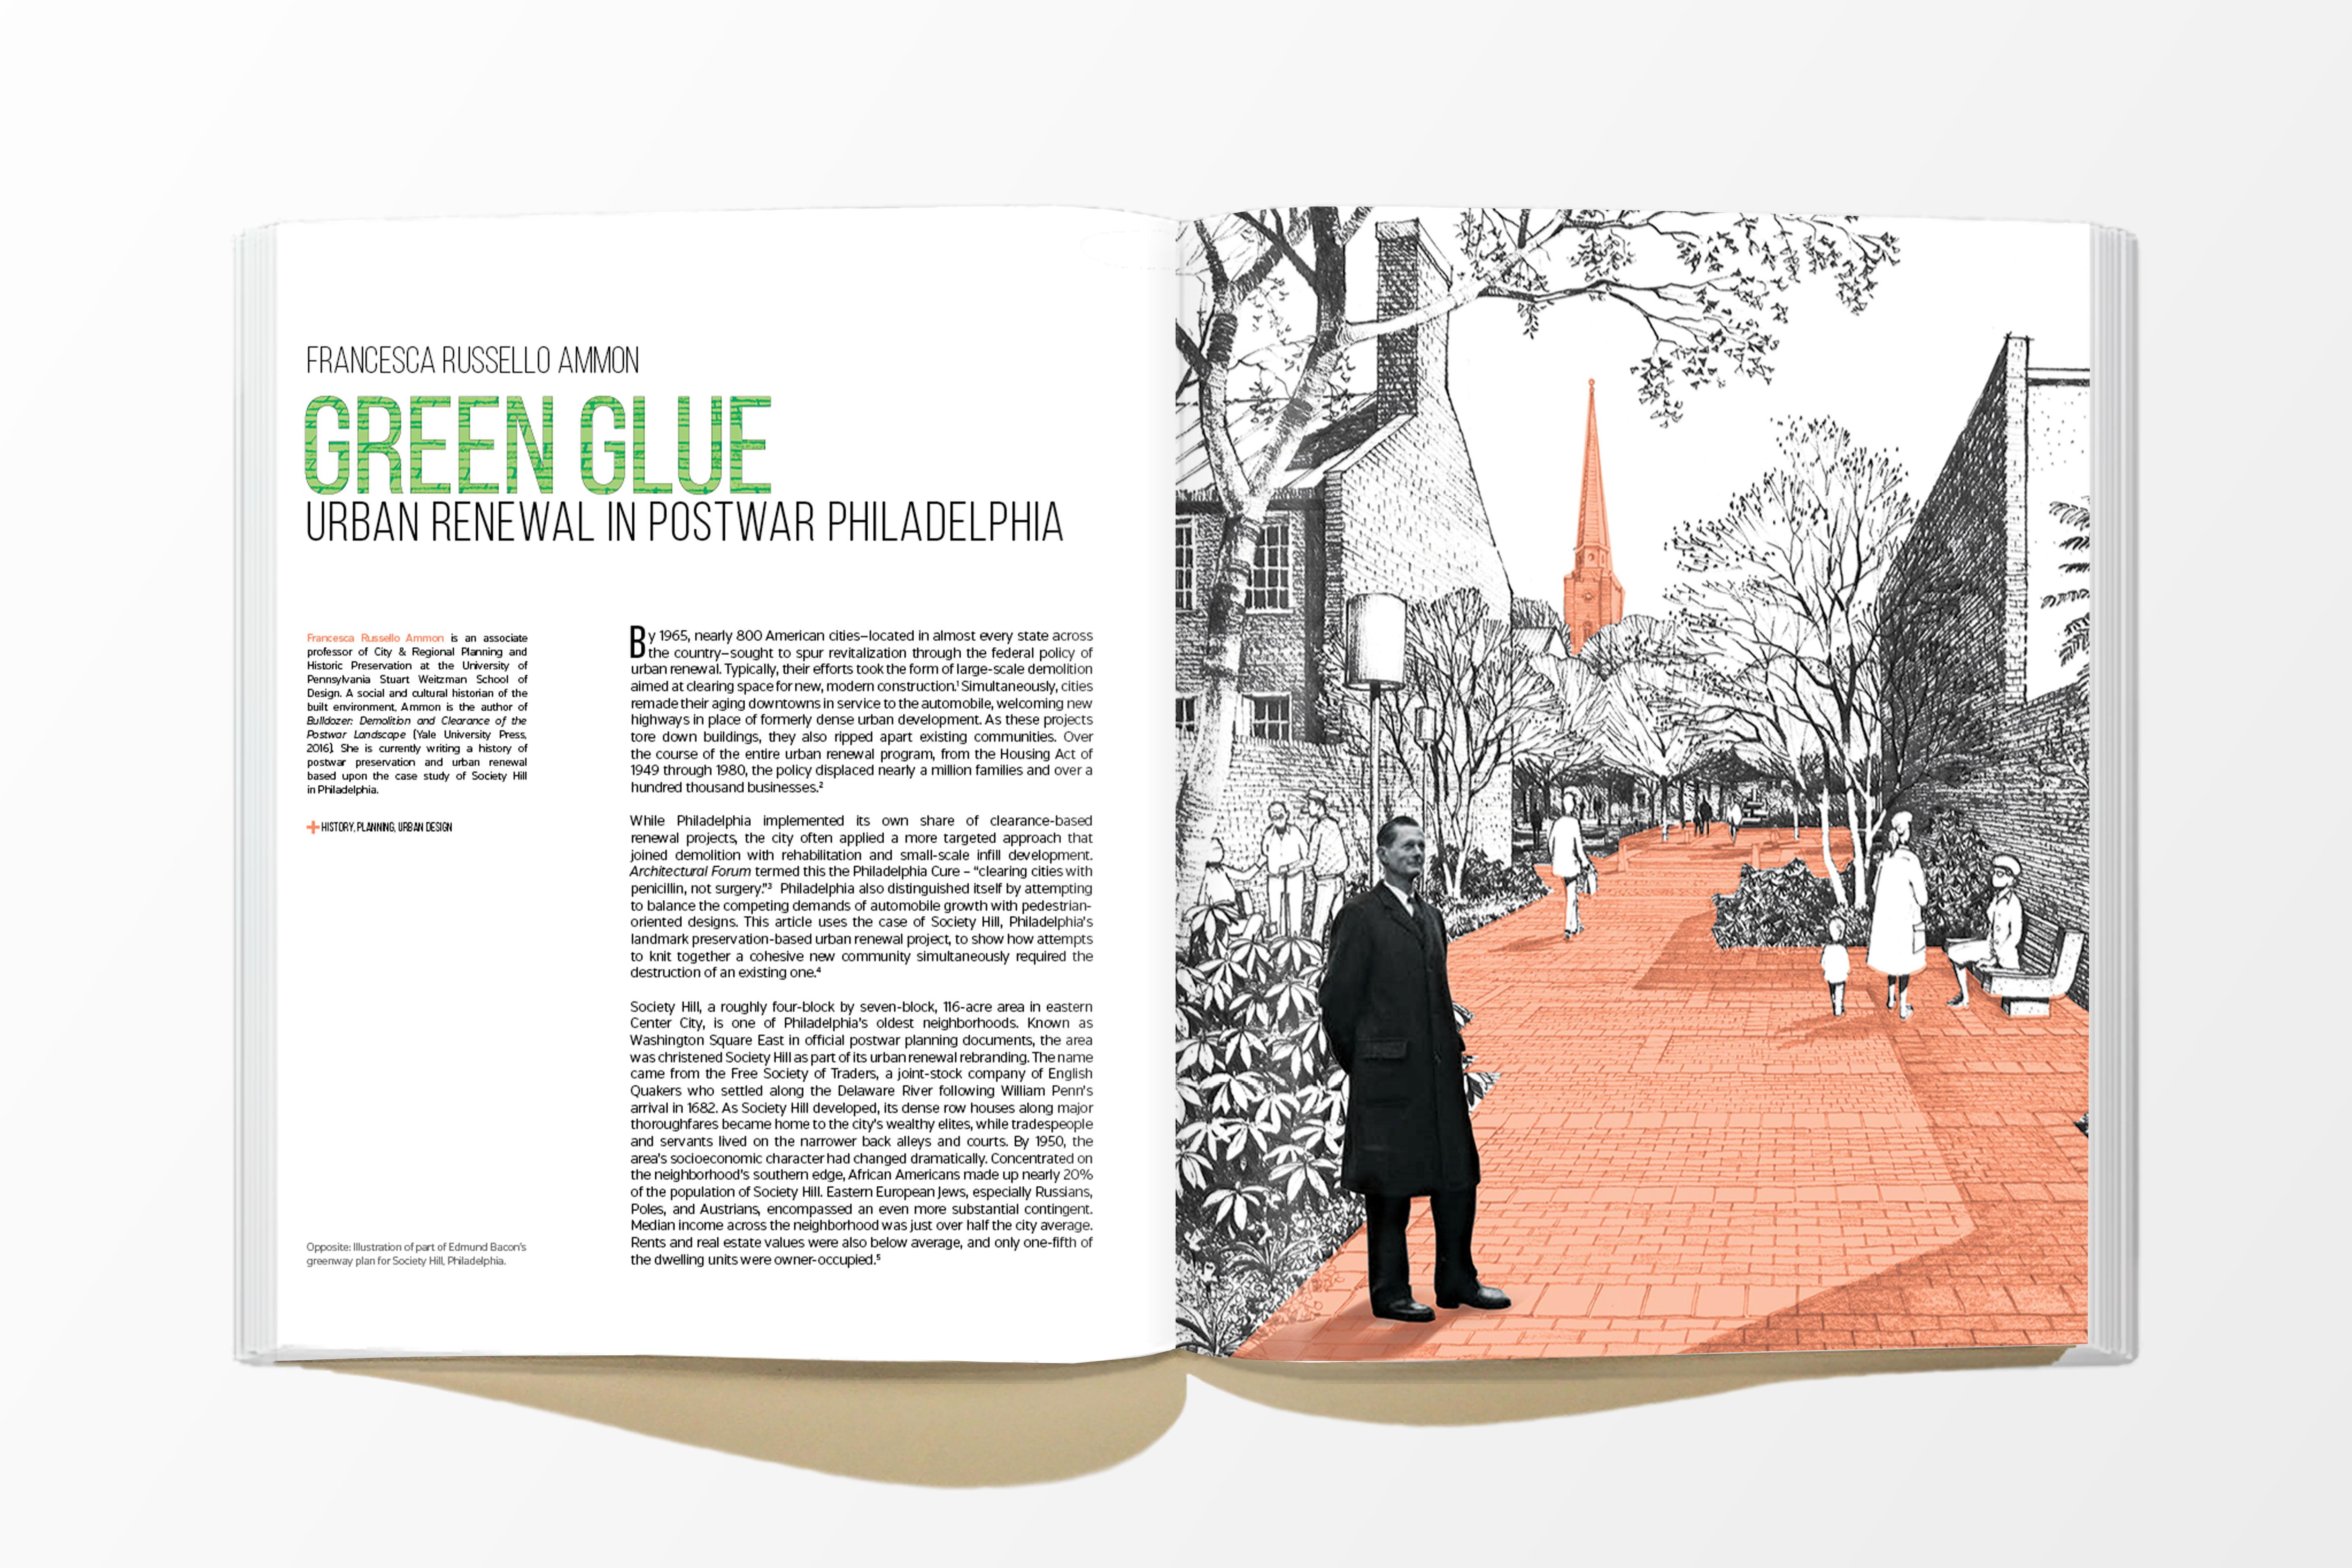 Green Glue History, in the beginning